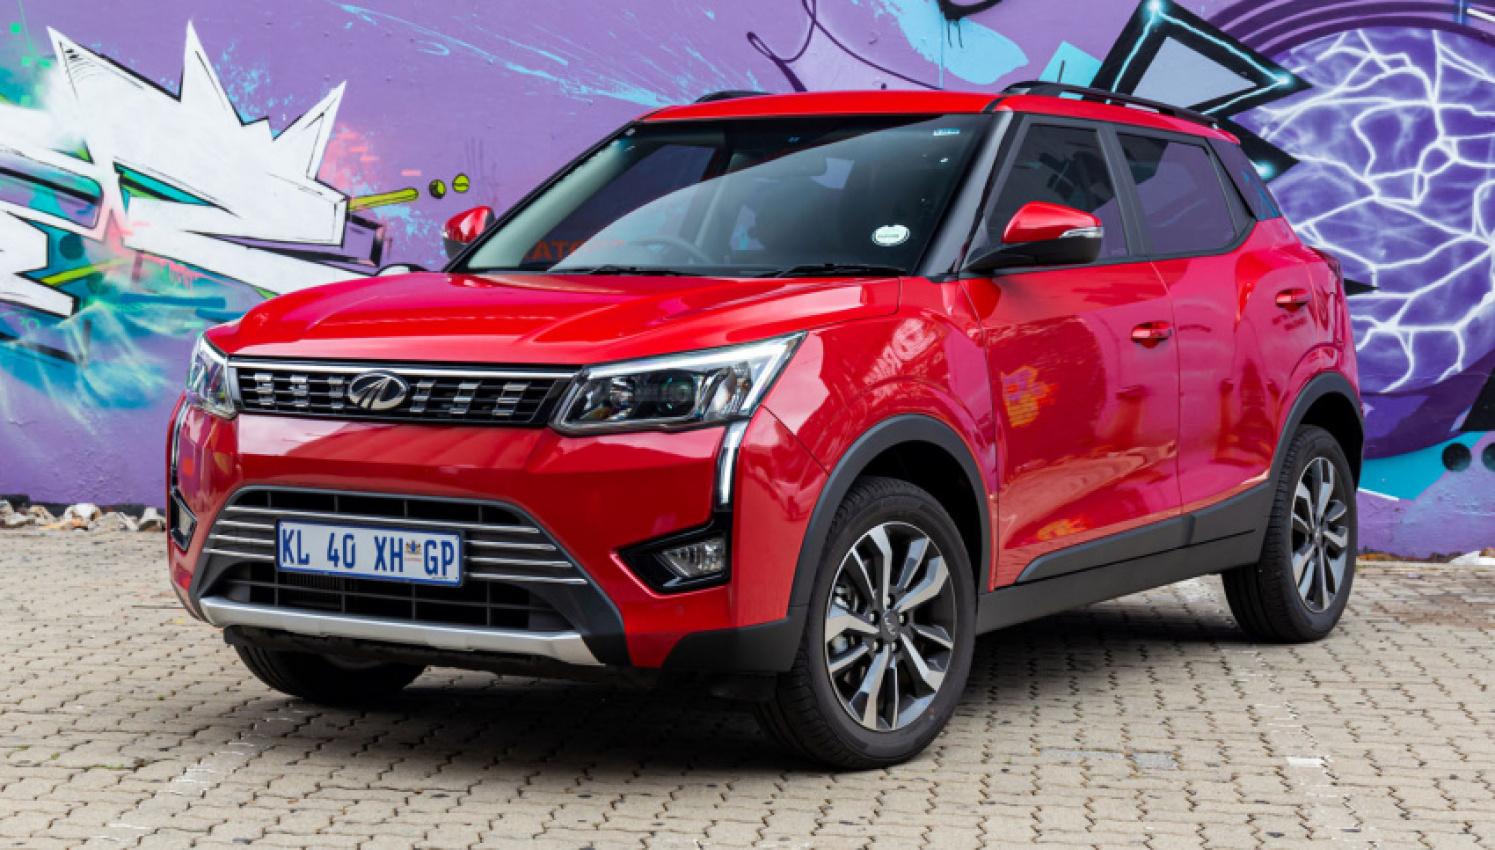 autos, cars, features, haval, mahindra, android, haval jolion, mahindra xuv300, android, top-end mahindra xuv300 vs entry-level haval jolion – r300,000 crossover comparison